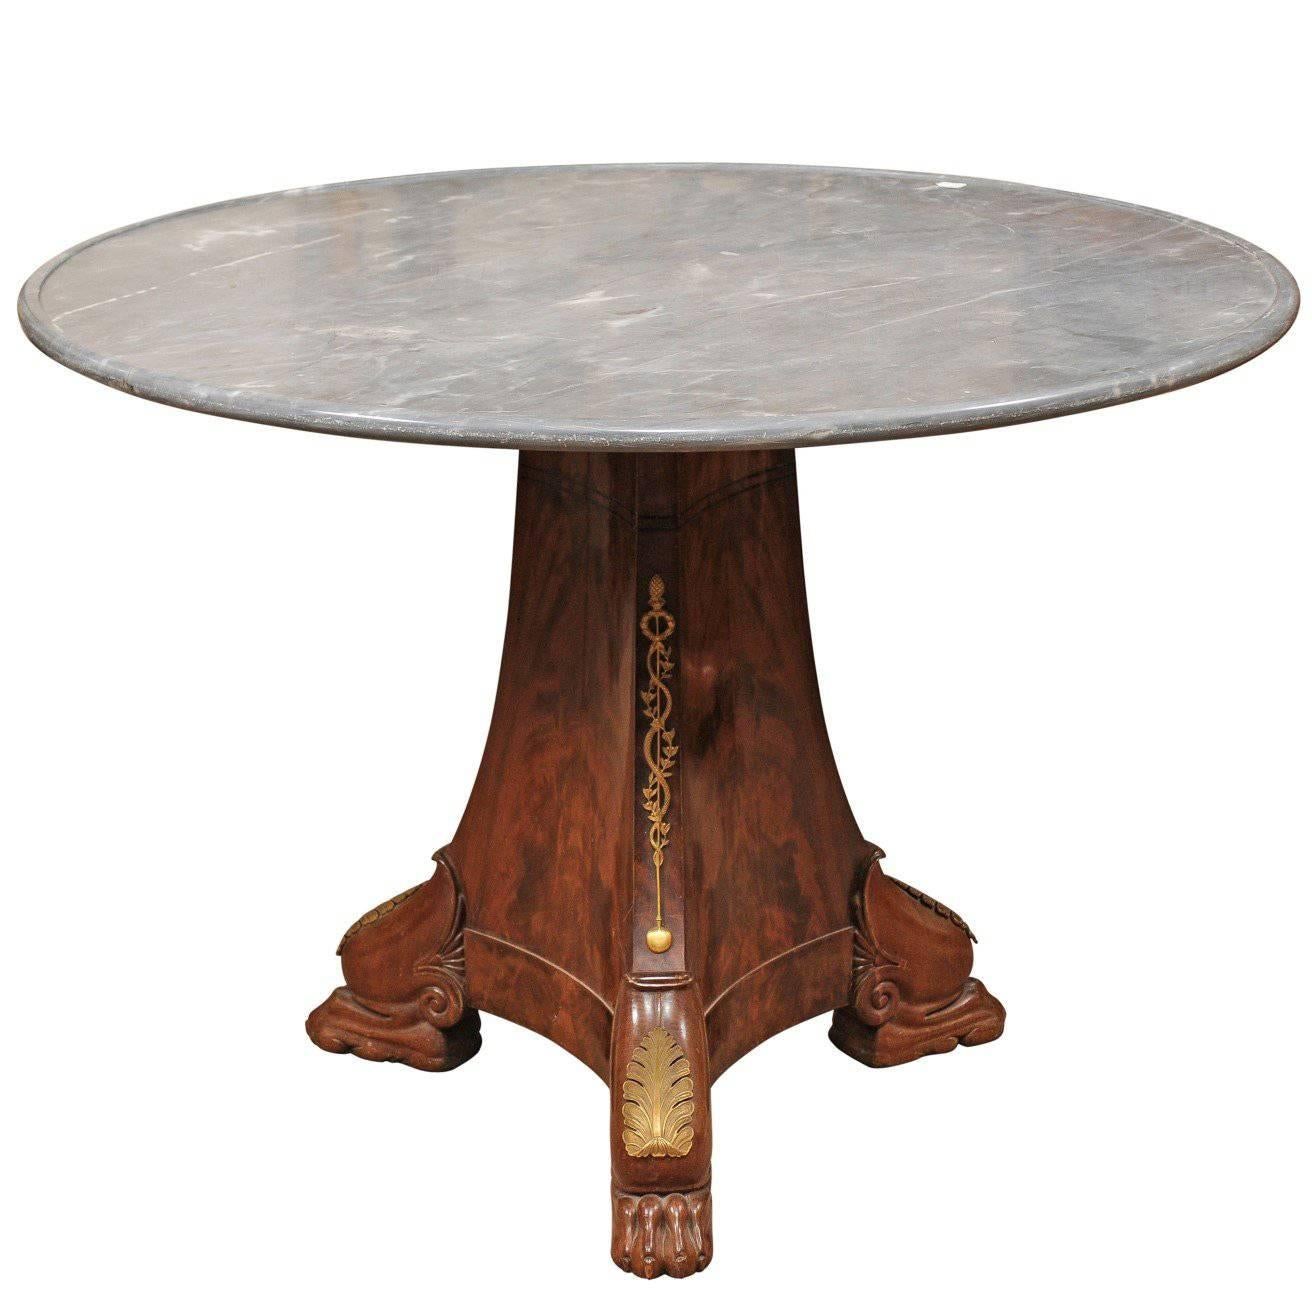 French Empire Mahogany Centre Table with Bronze Dore Mounts, Early 19th Century For Sale